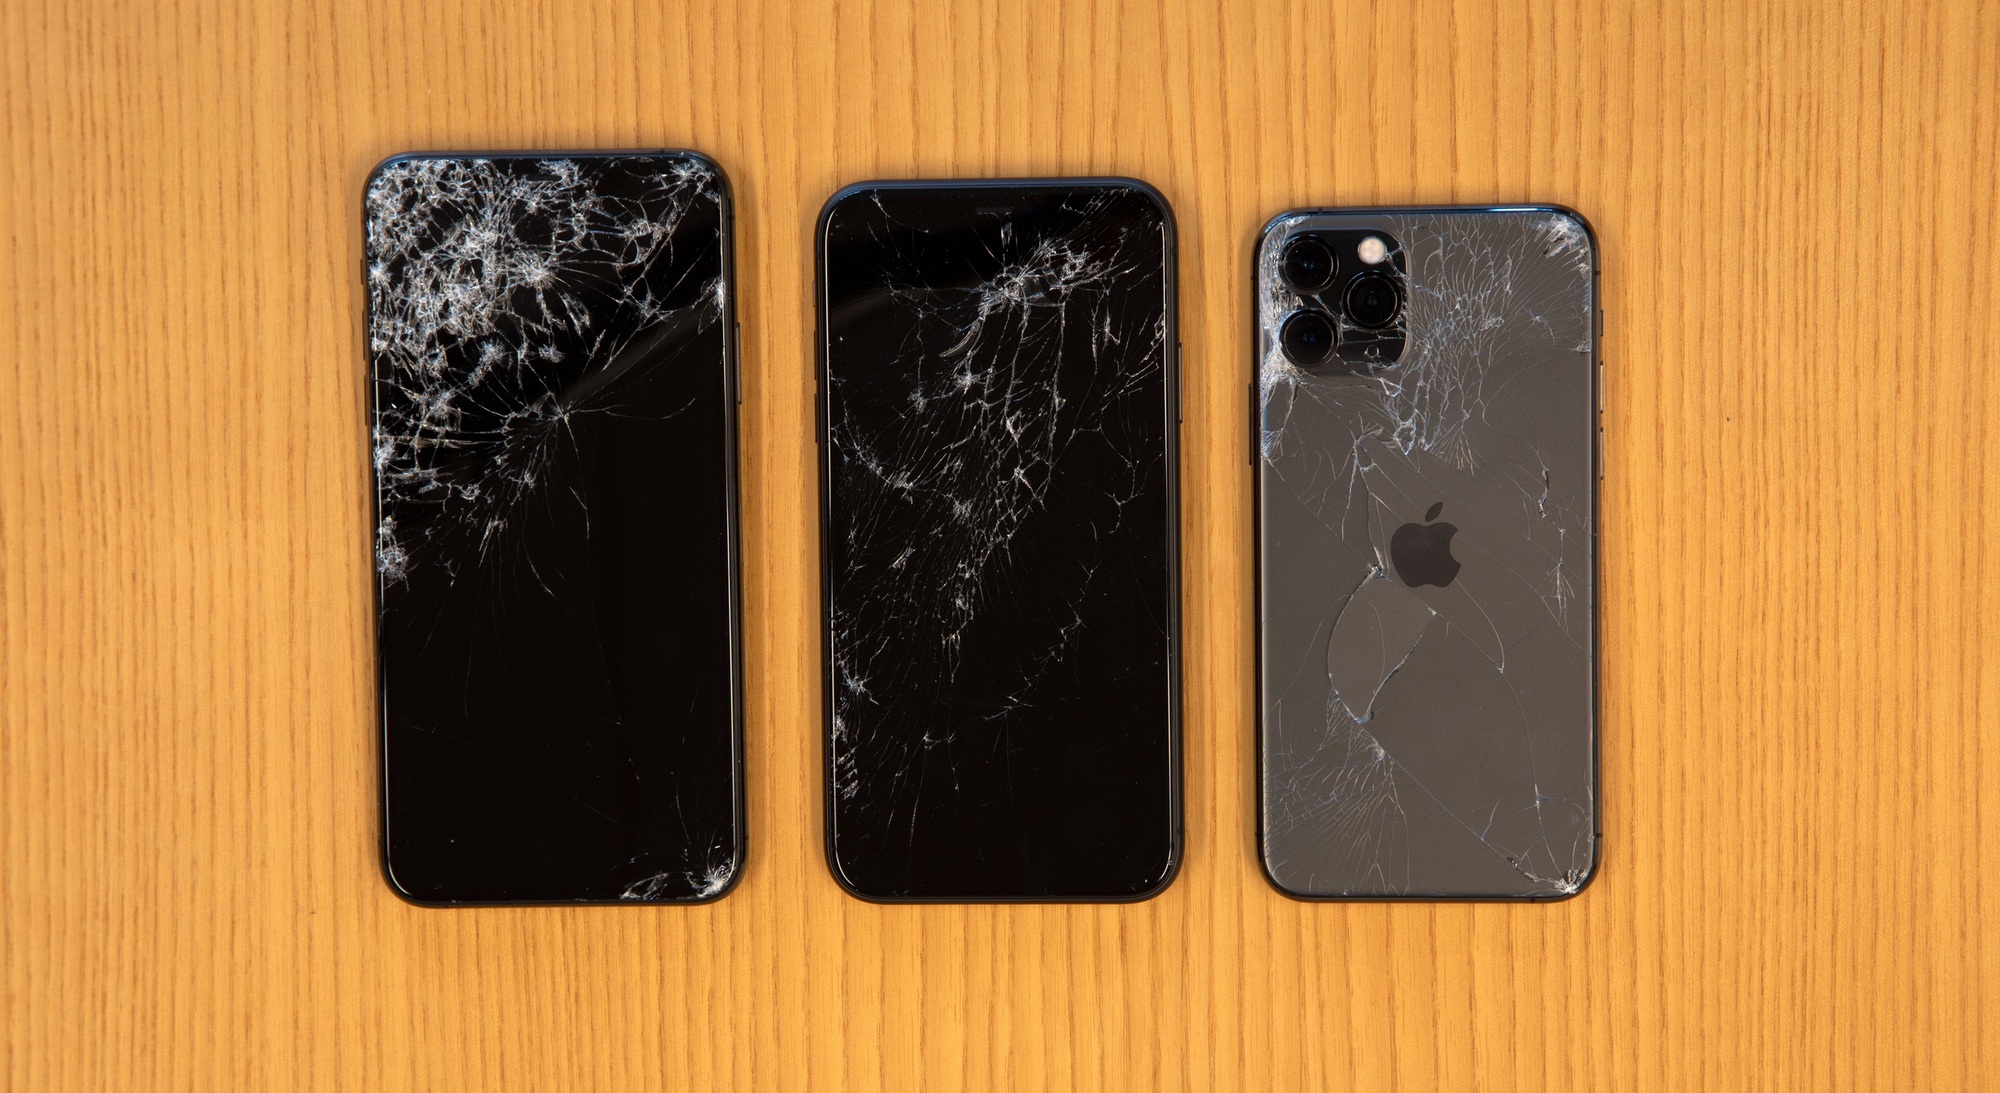 Does iPhone 11 have good durability?